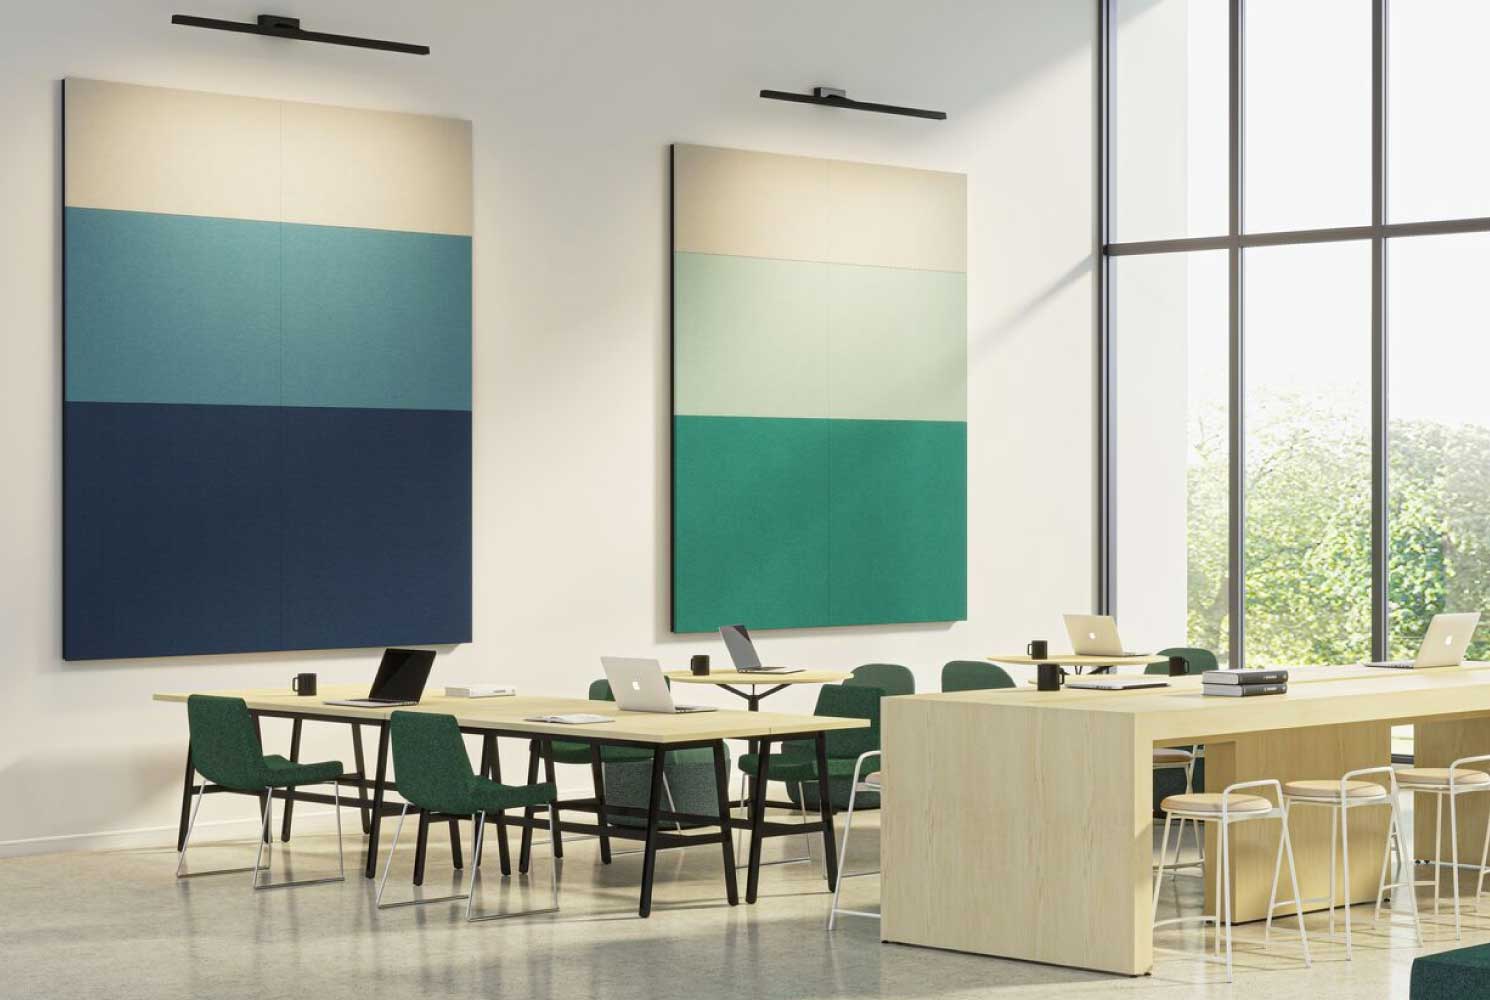 Multiple workspaces with Teknion Acoustic Wall Tiles